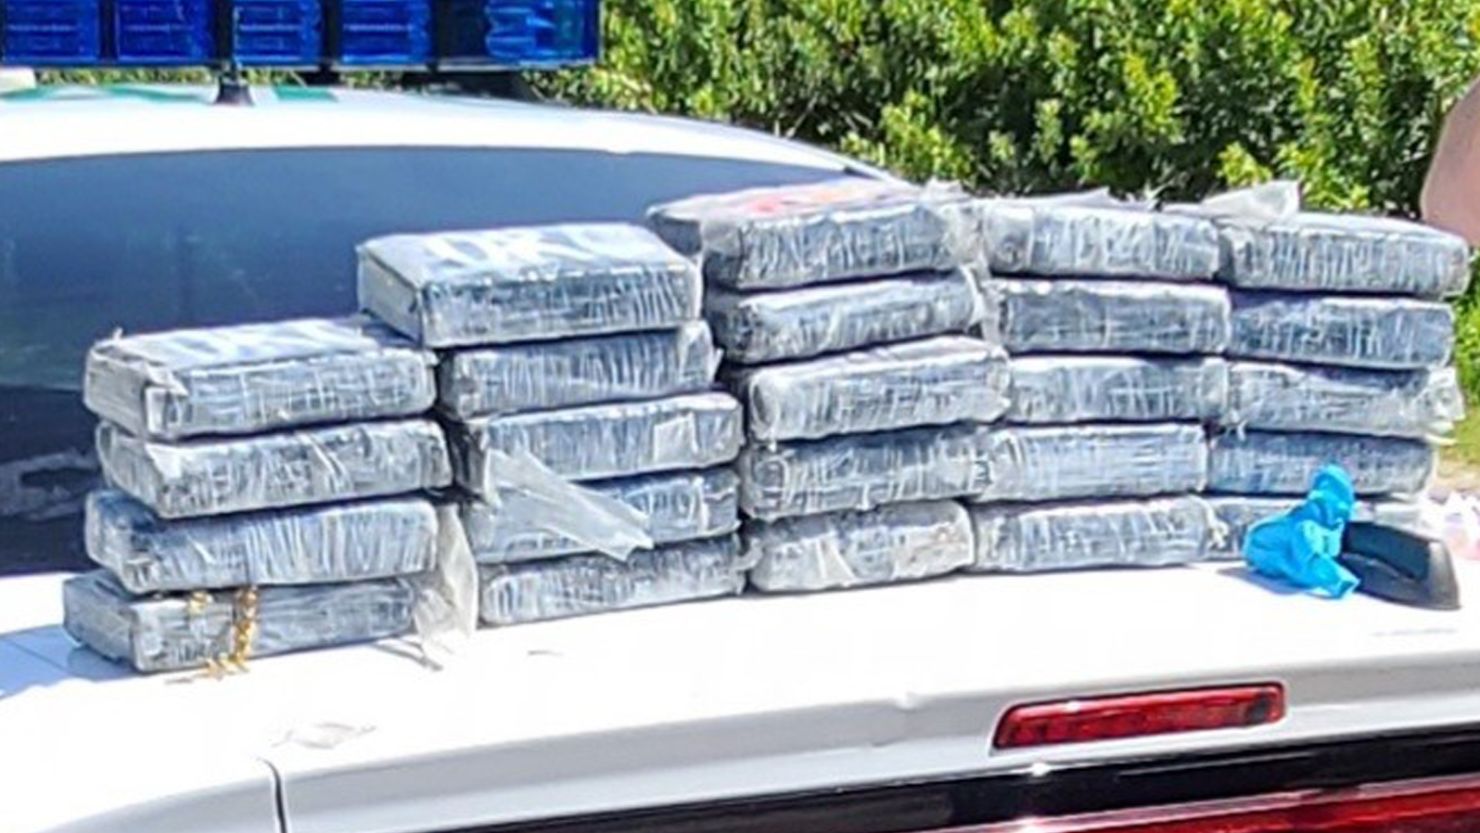 Members of the 45th Security Forces Squadron seized nearly 30 kilograms of cocaine that washed ashore on a Florida beach.